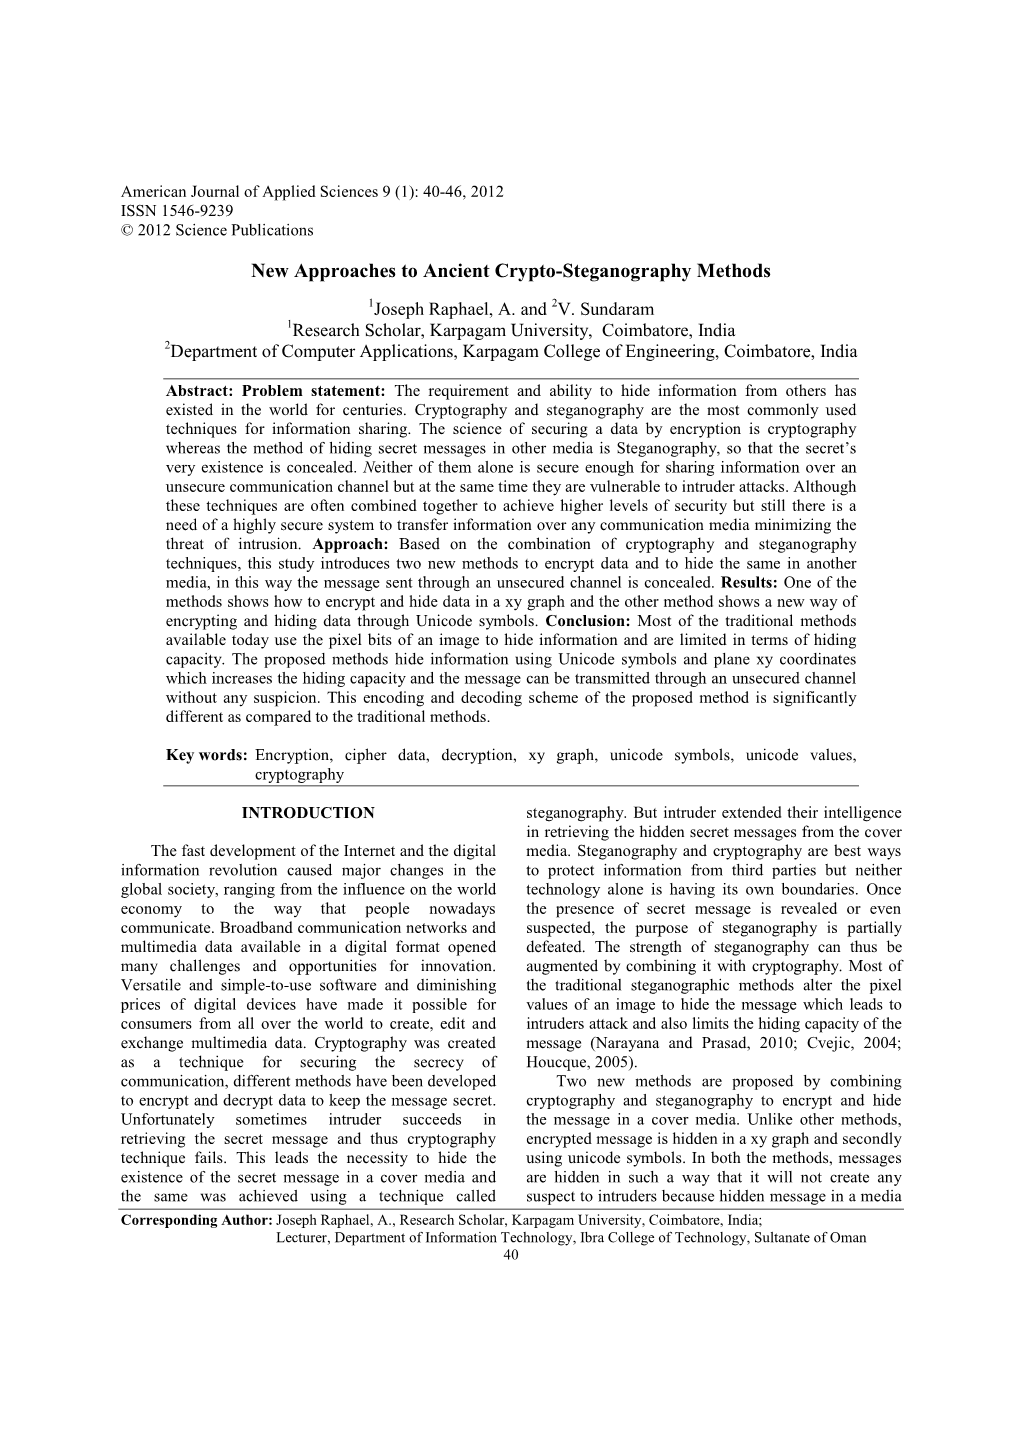 New Approaches to Ancient Crypto-Steganography Methods